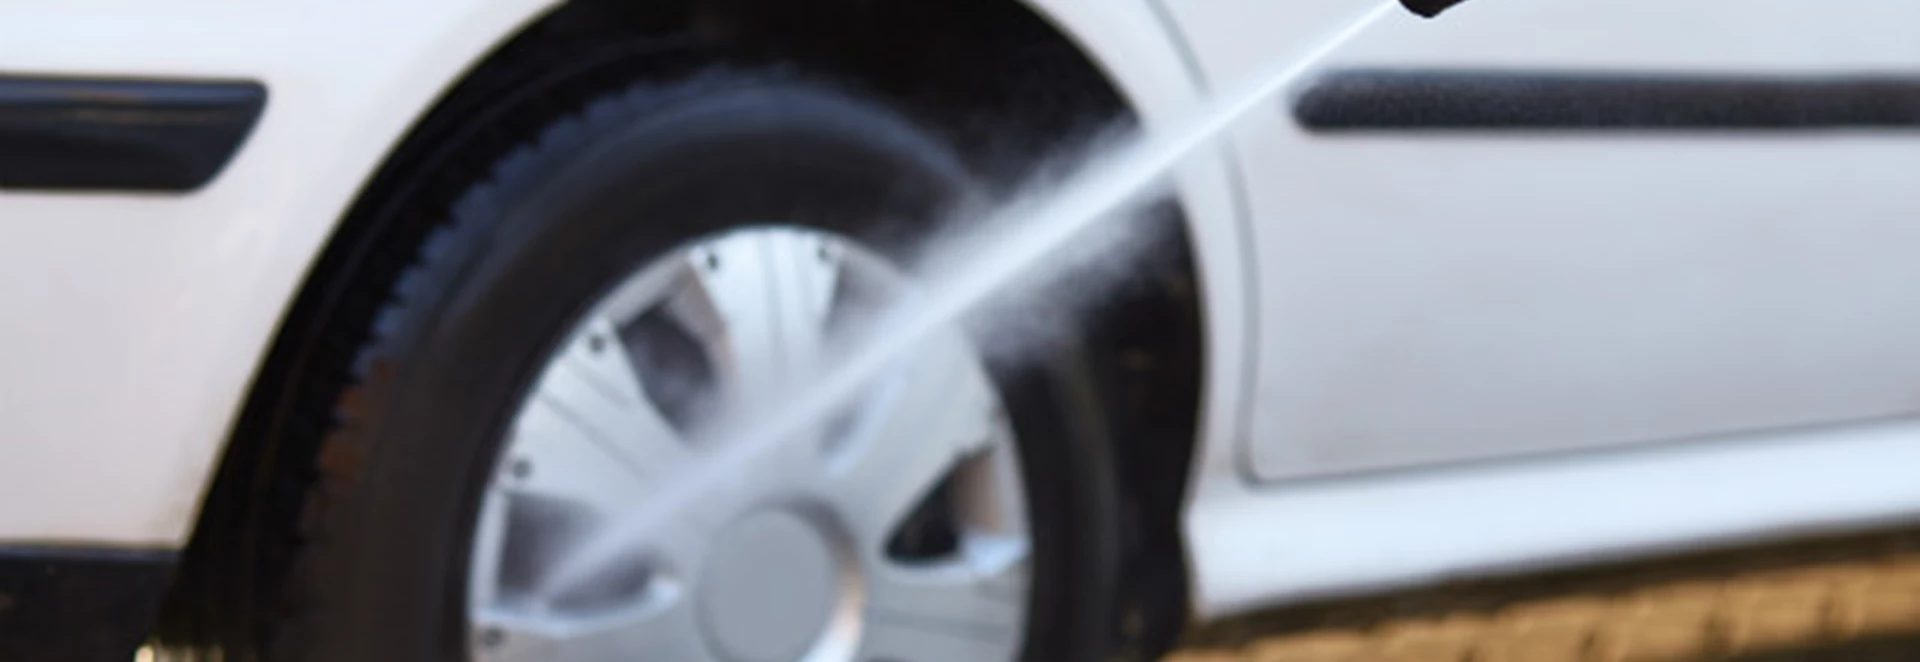 Tips for pressure washing your car 